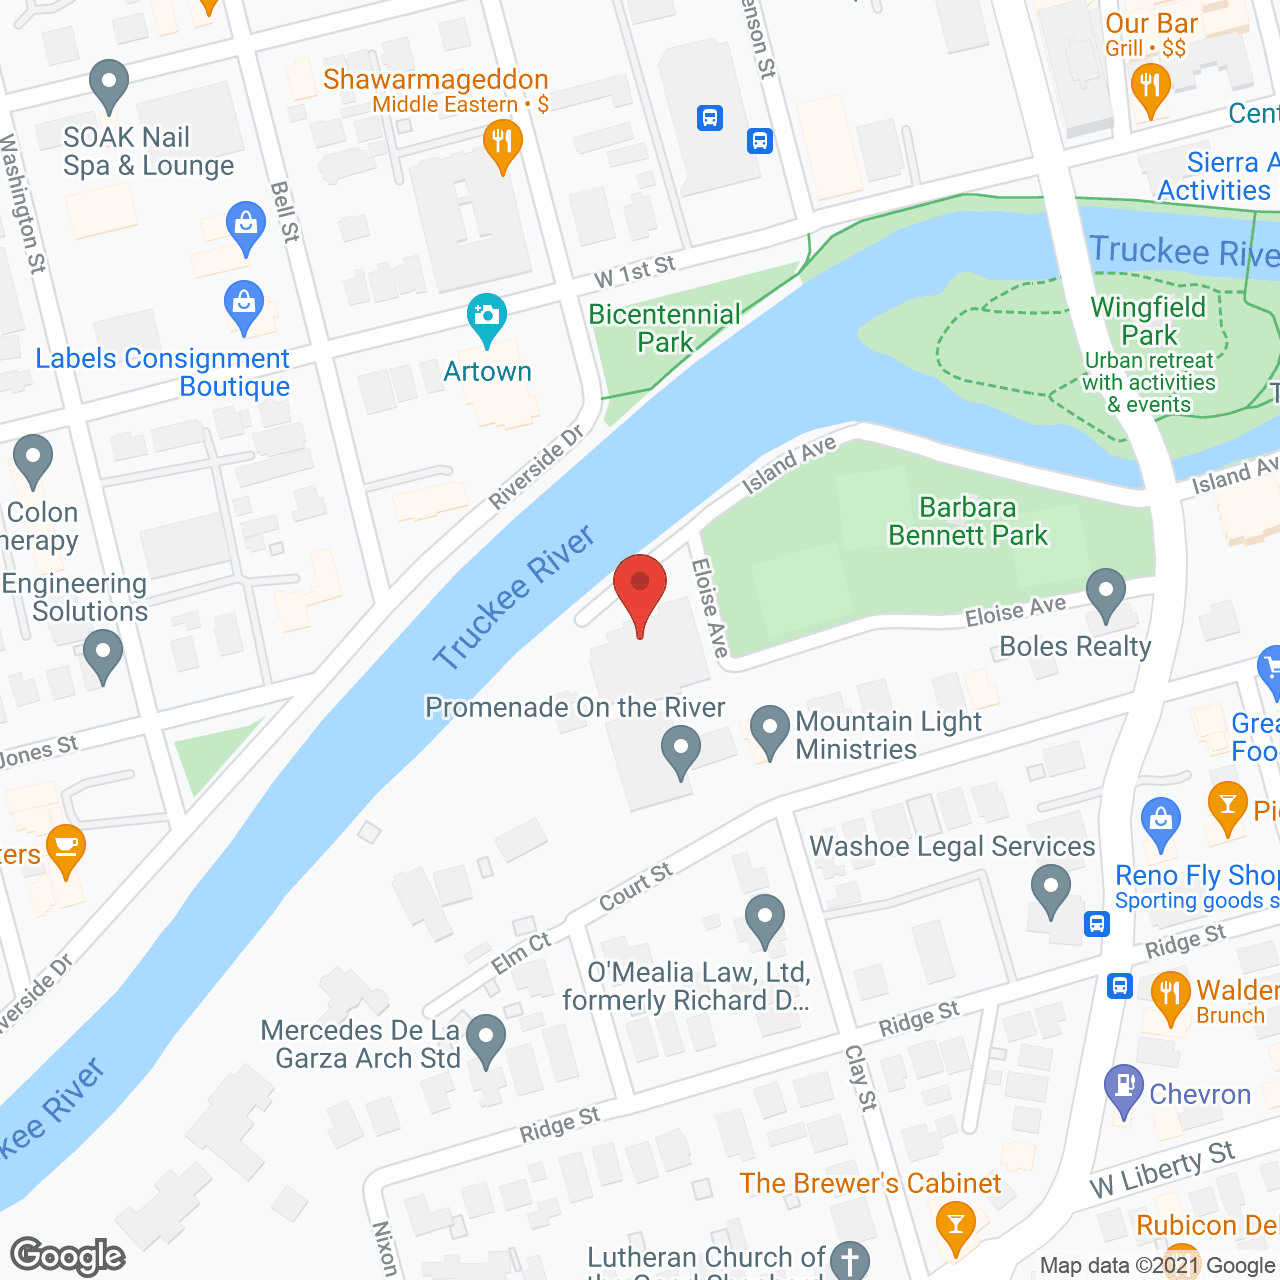 Promenade on the River in google map